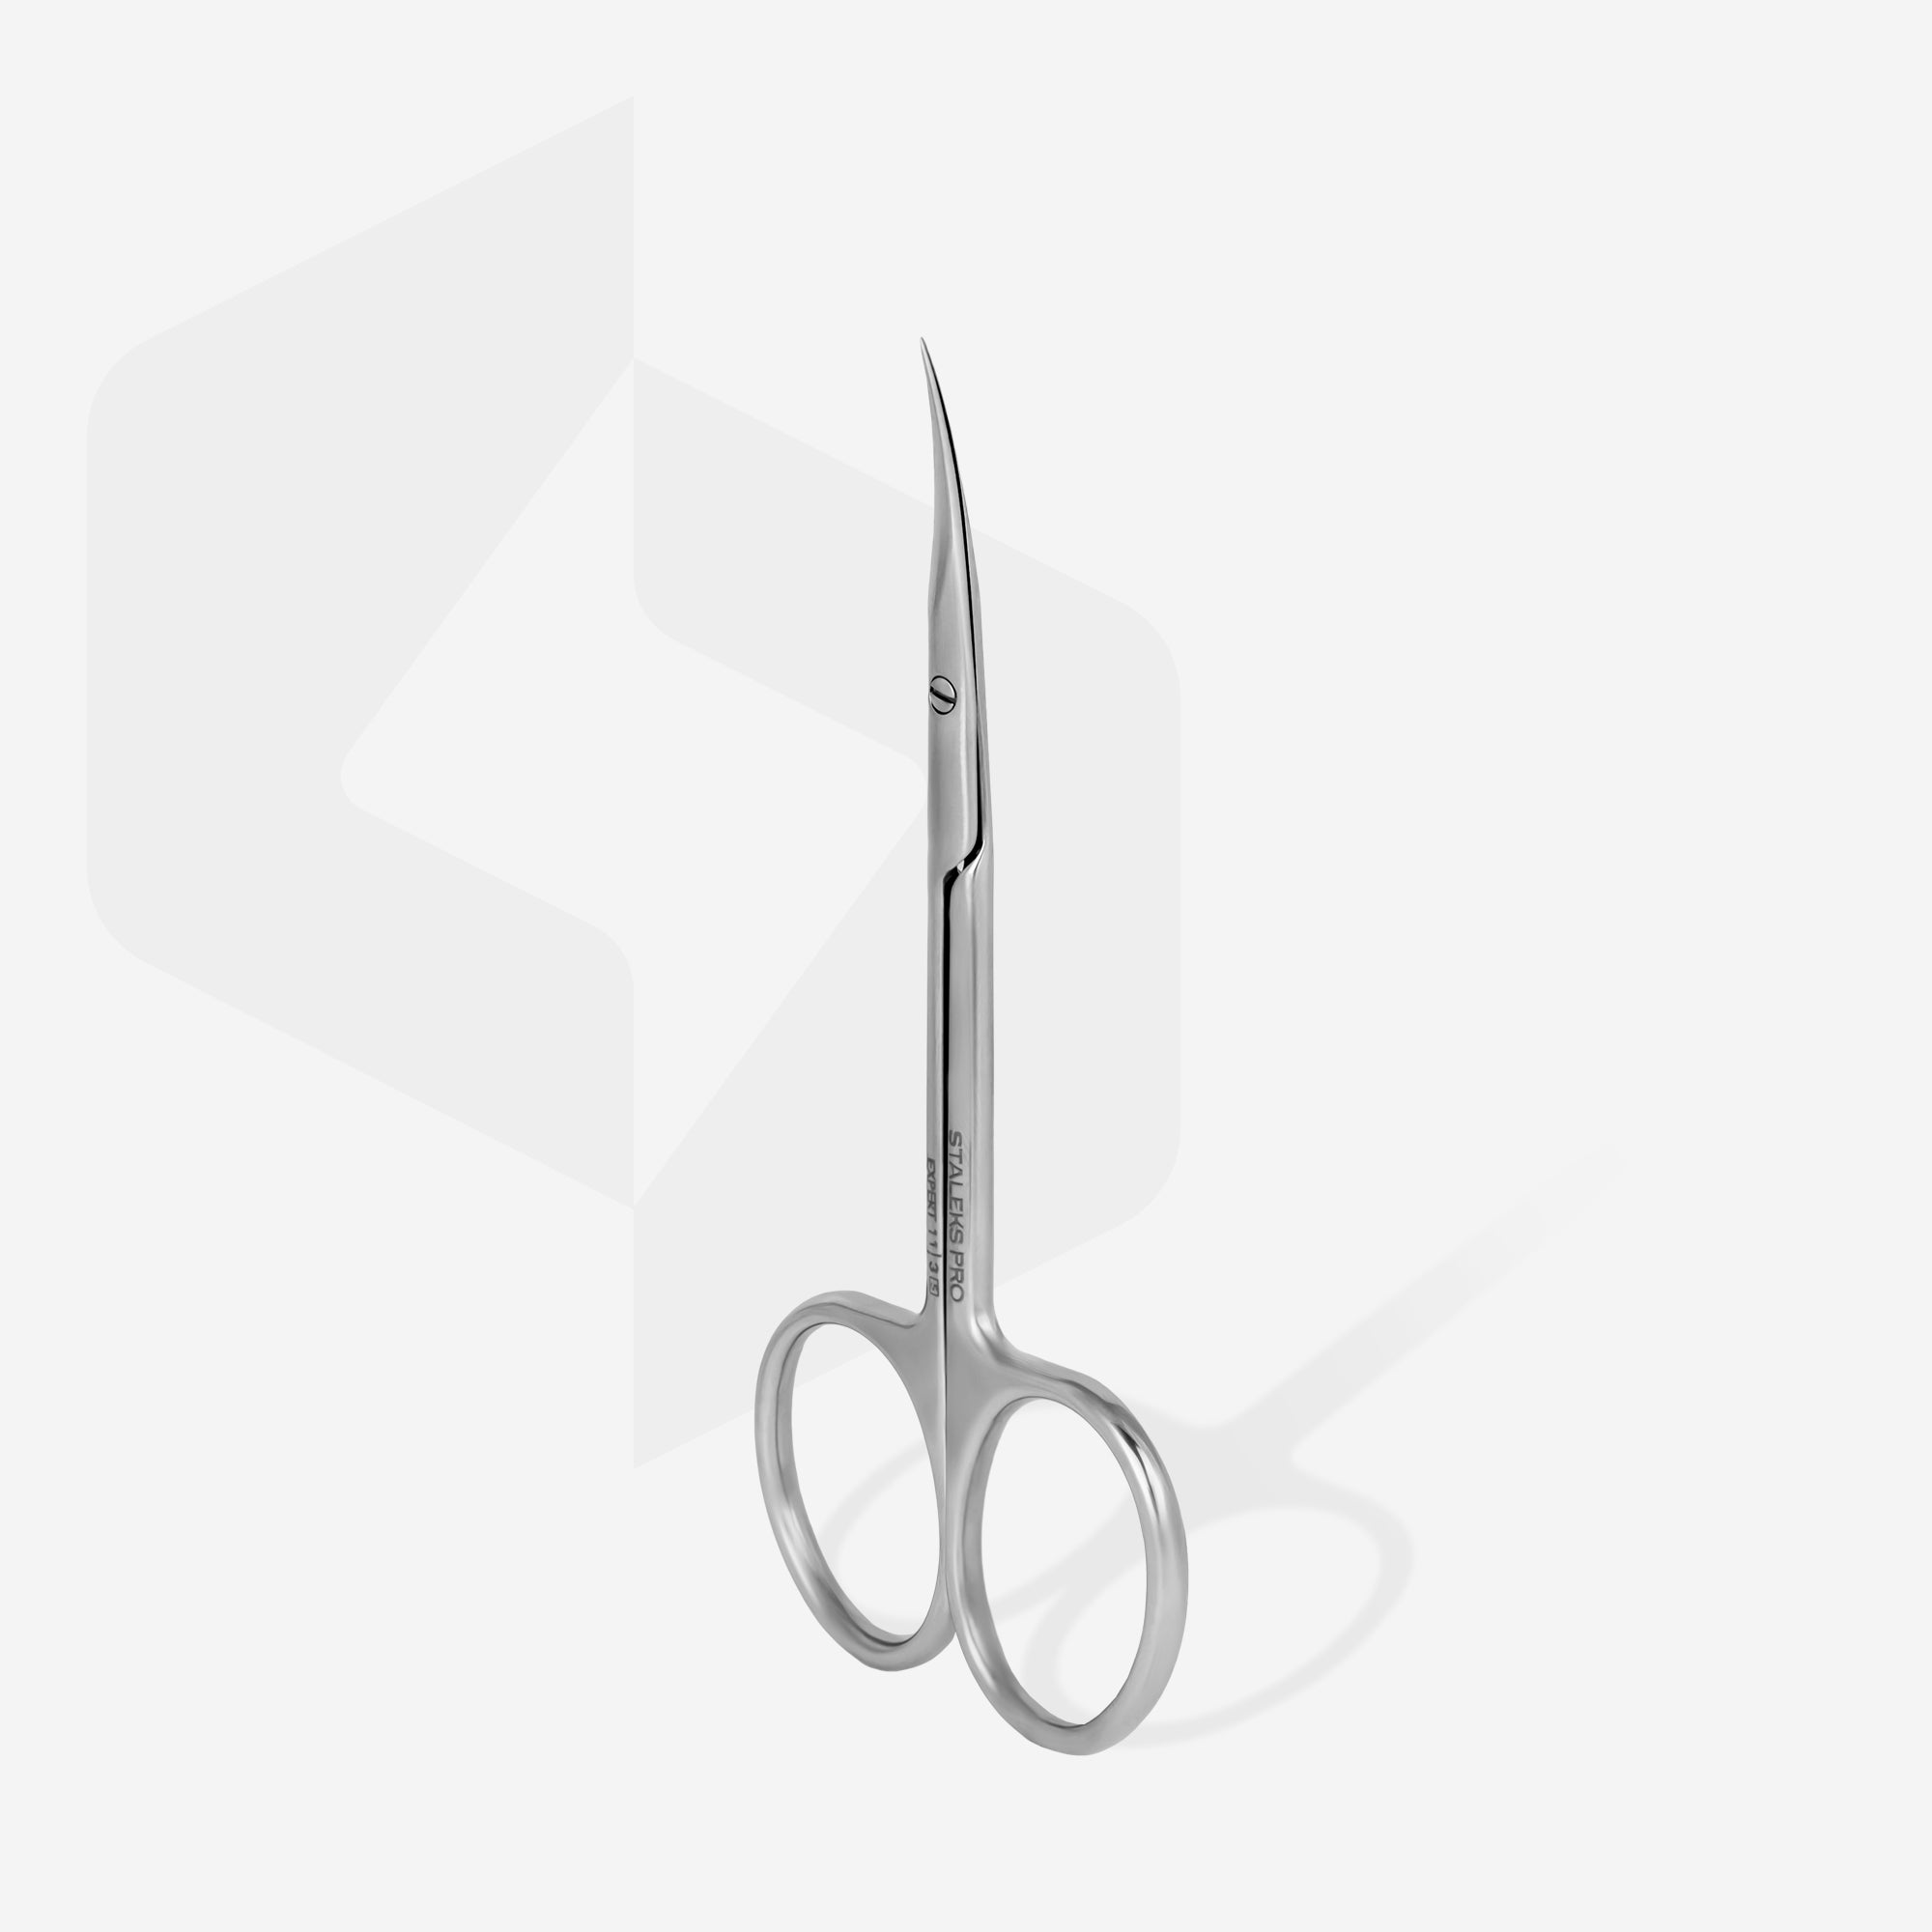 Staleks Pro Cuticle Scissors - For Left Handed Users